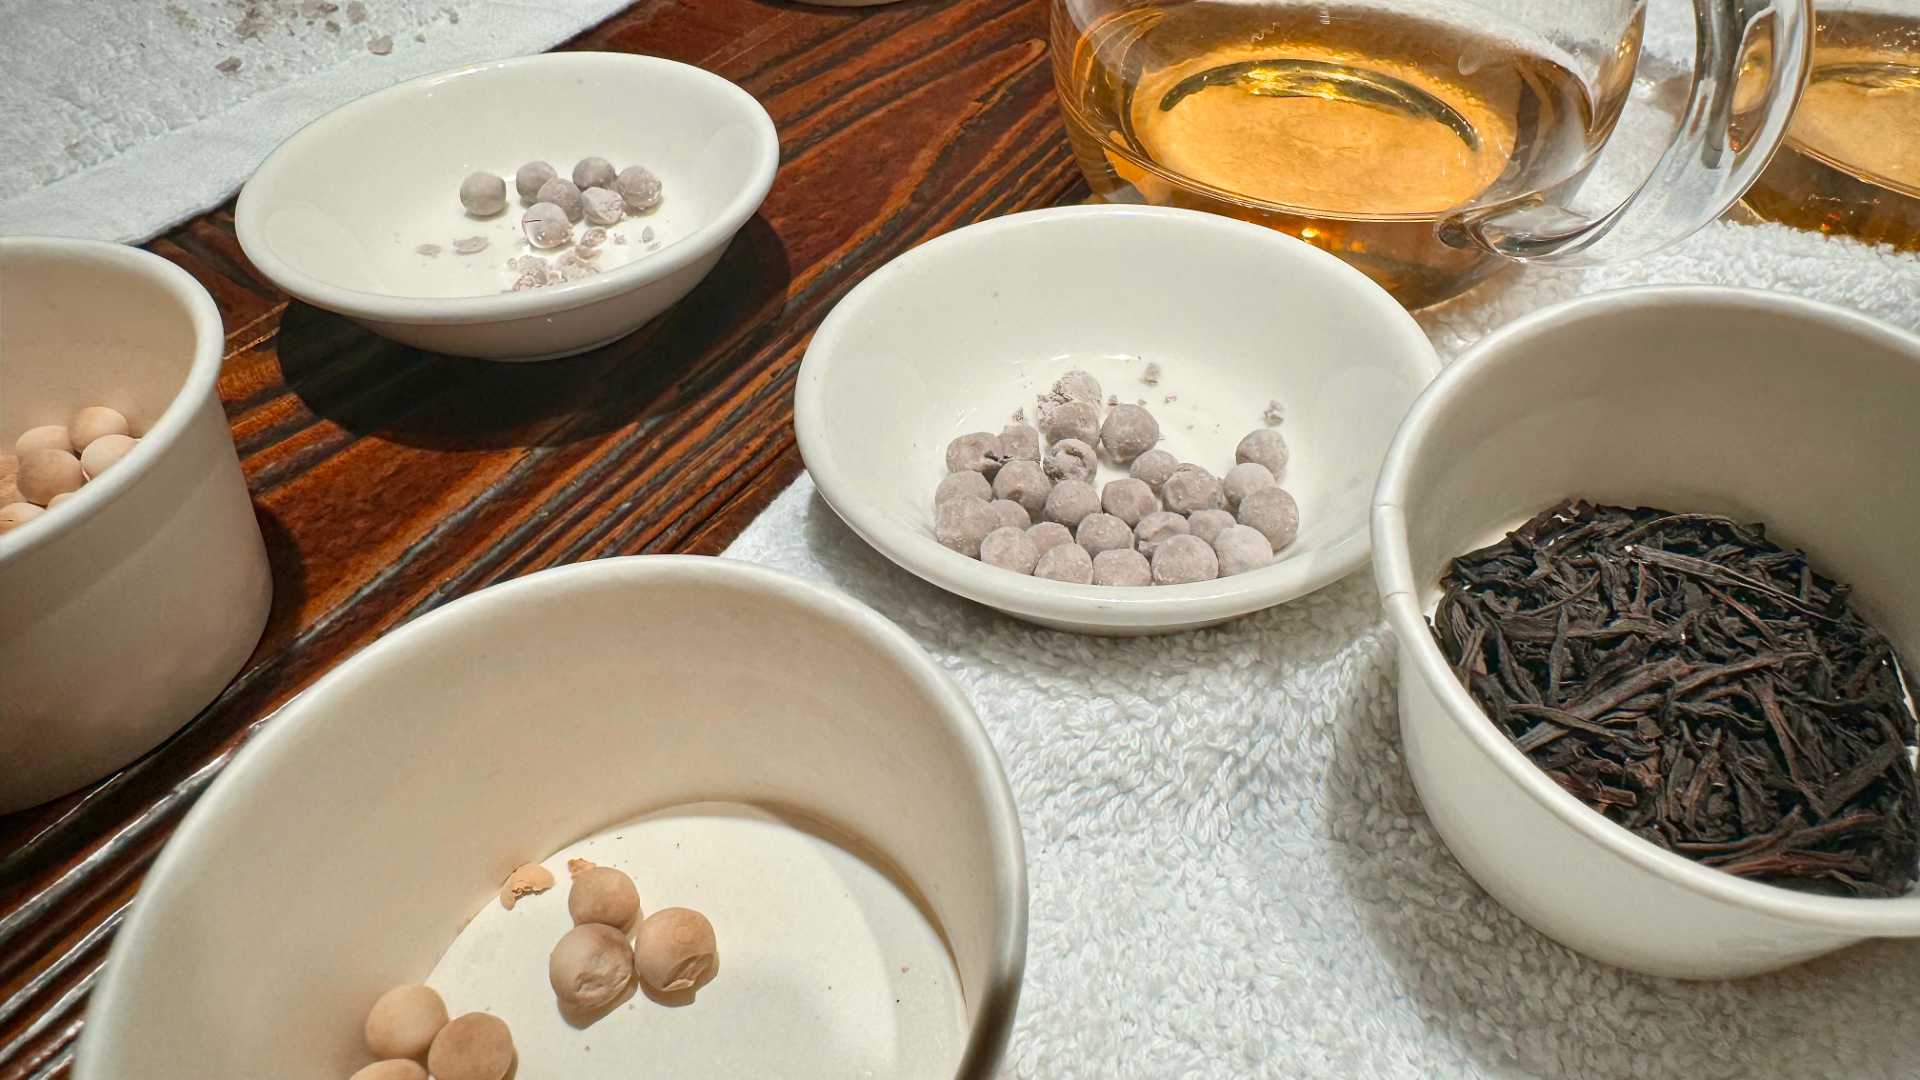 Bubble tea ingredients in container on a wooden table. Visible are black tea leaves, uncooked black and white tapioca balls, and liquid cane sugar.